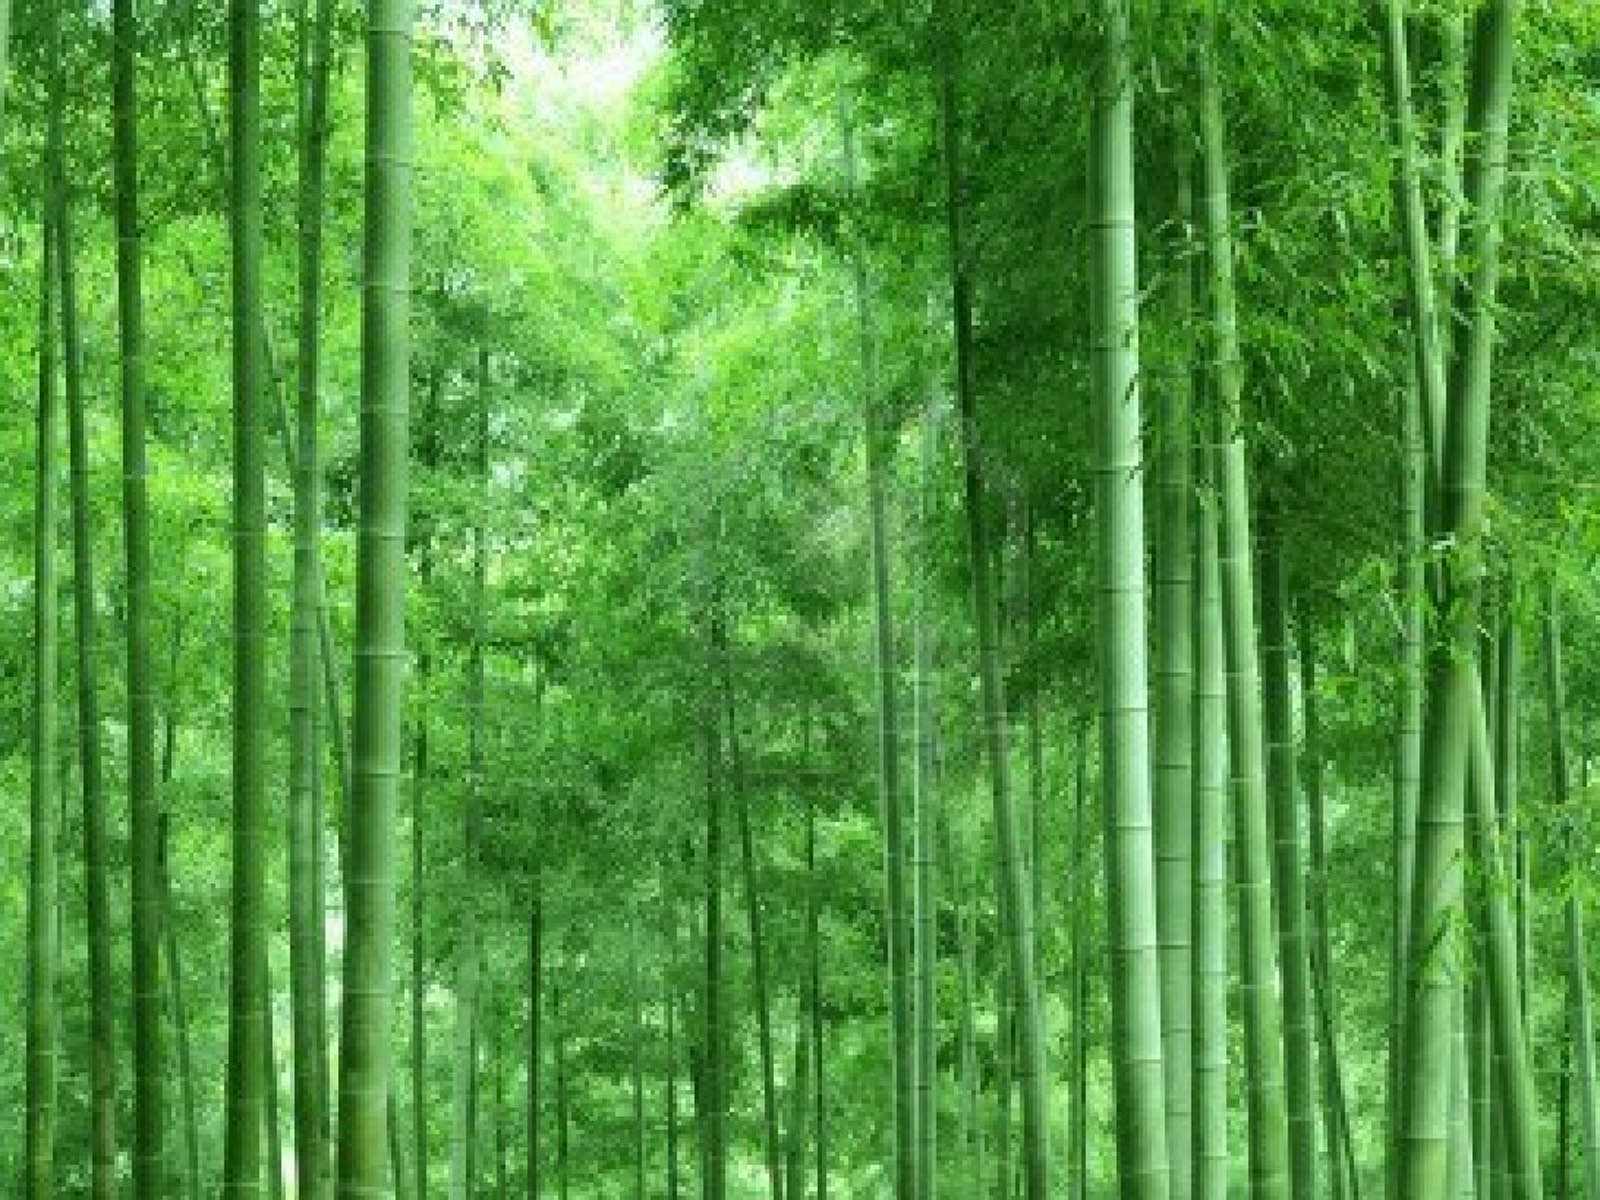 Wallpapers Bamboo Forest Wallpapers Afalchi Free images wallpape [afalchi.blogspot.com]